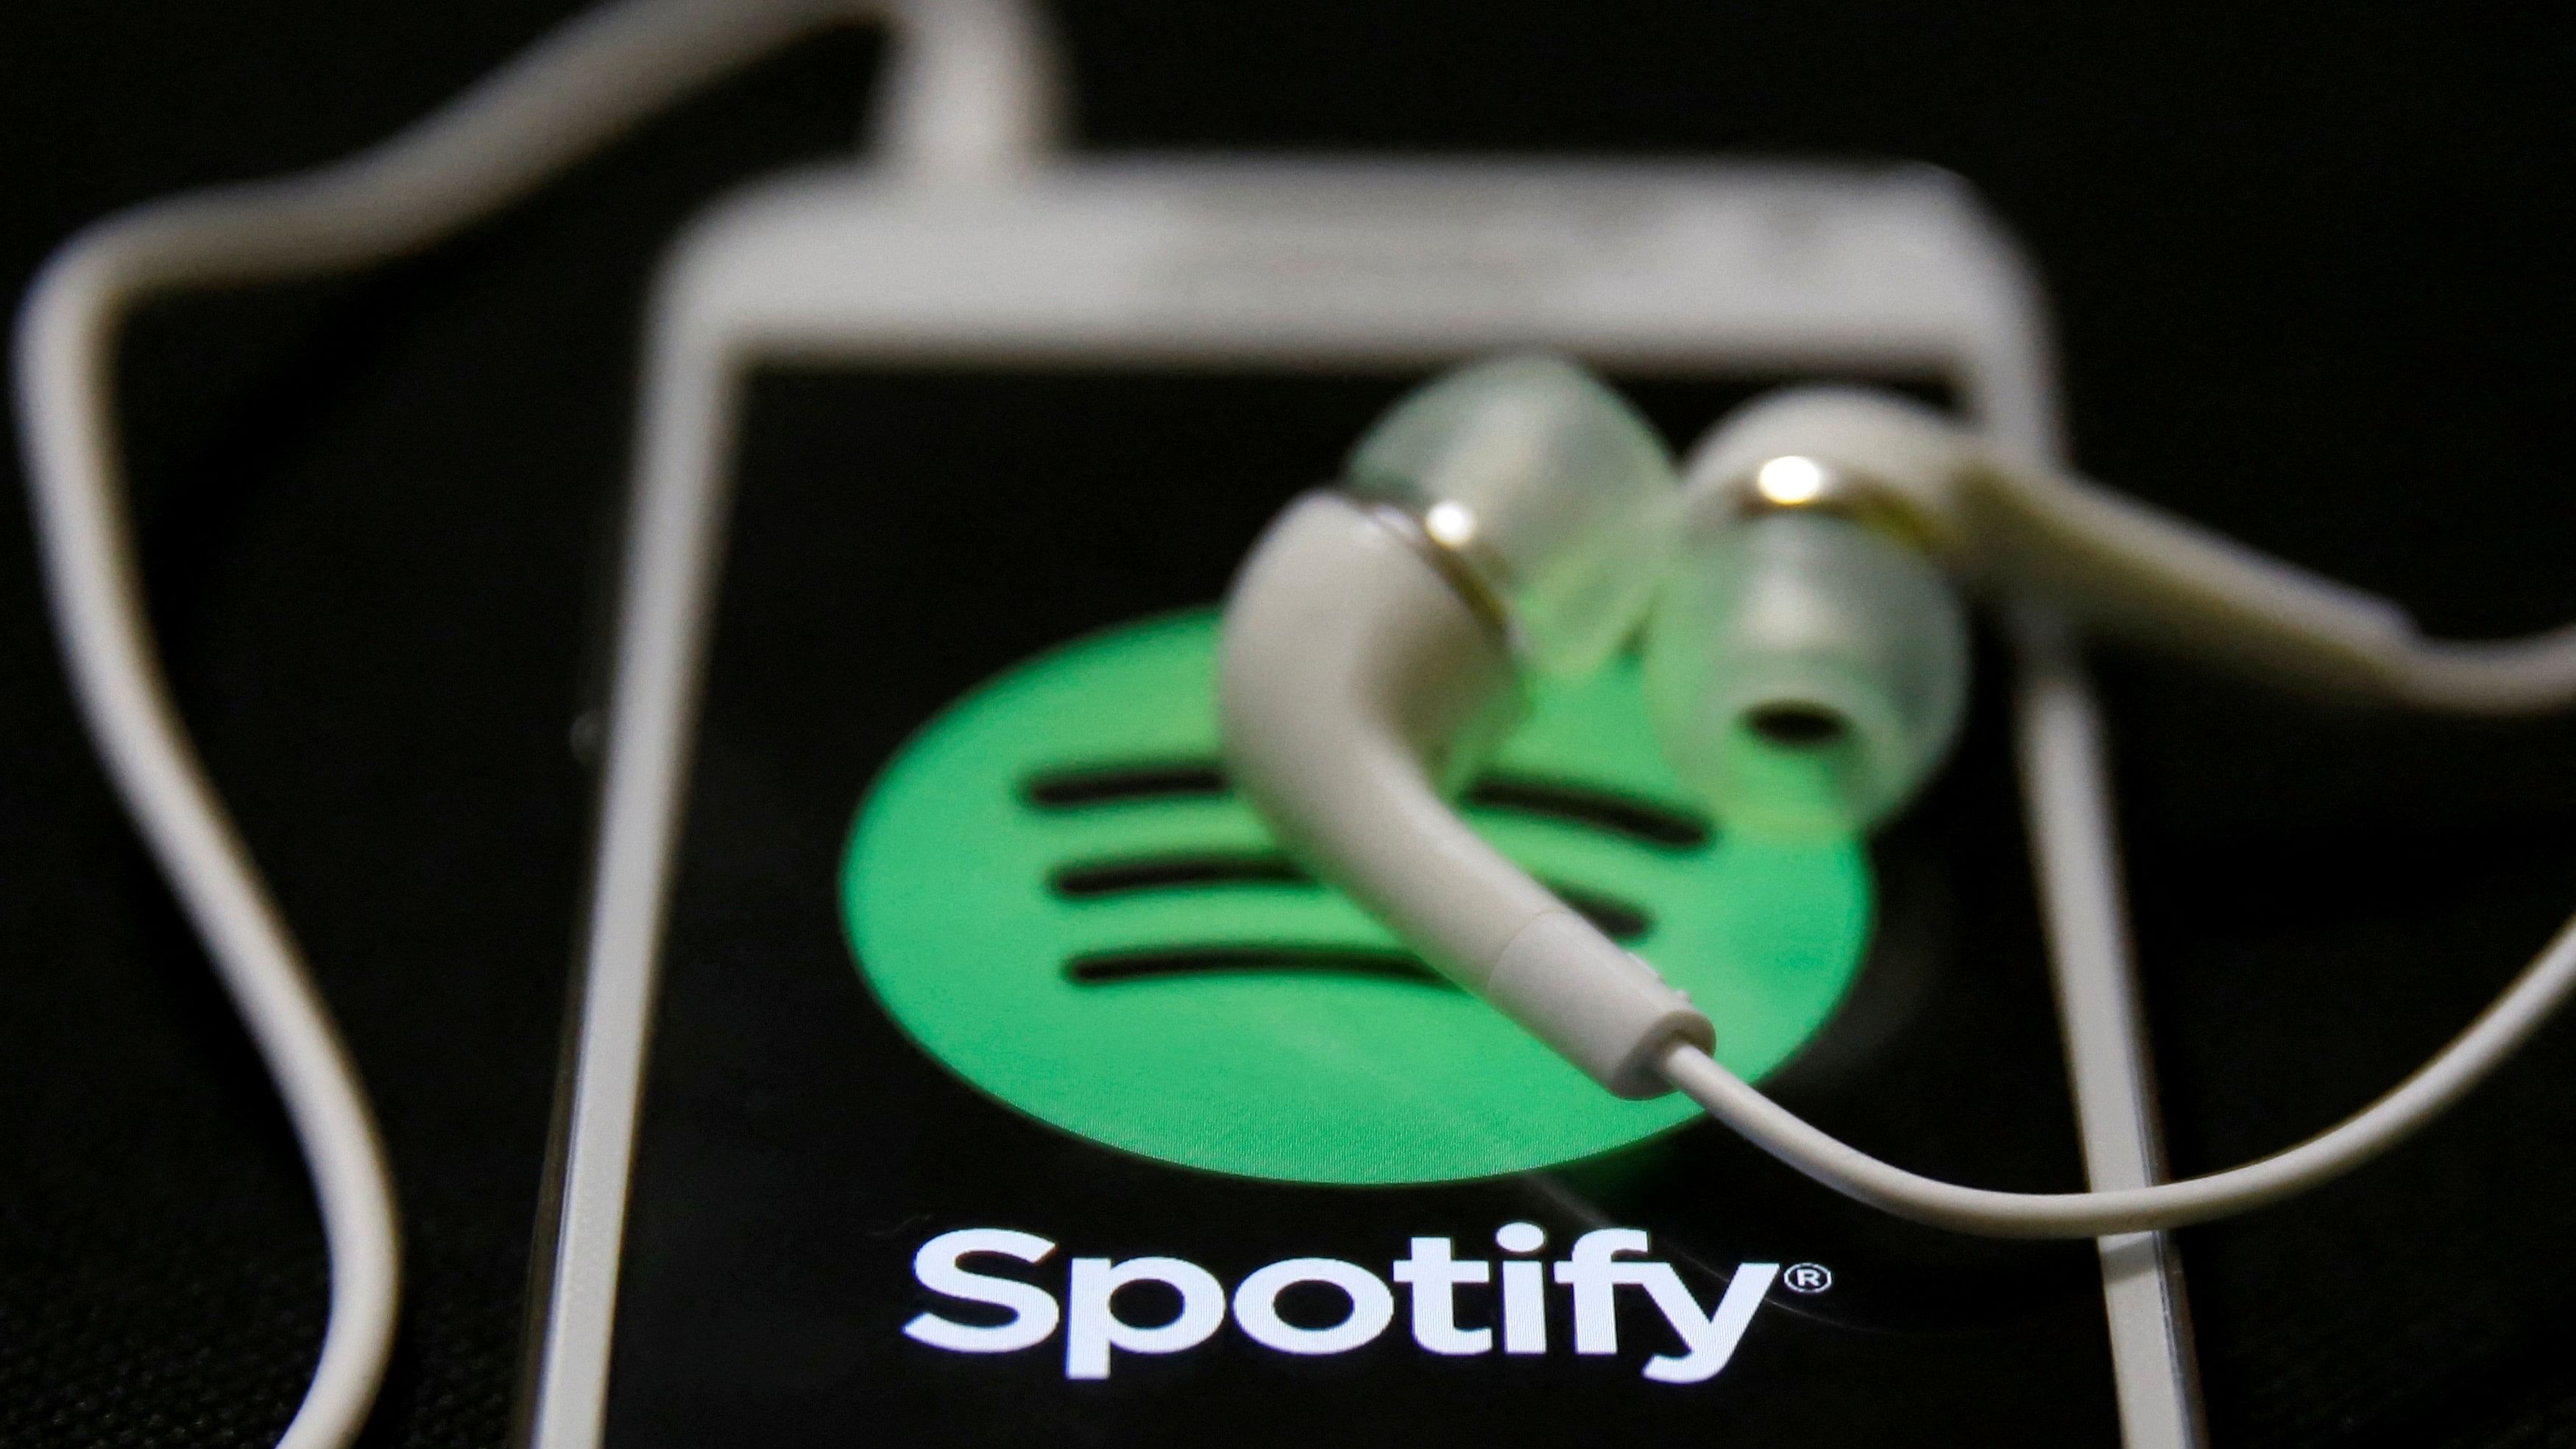 <div class="paragraphs"><p>Earphones are seen on top of a smart phone with a Spotify logo on it.&nbsp;</p></div>